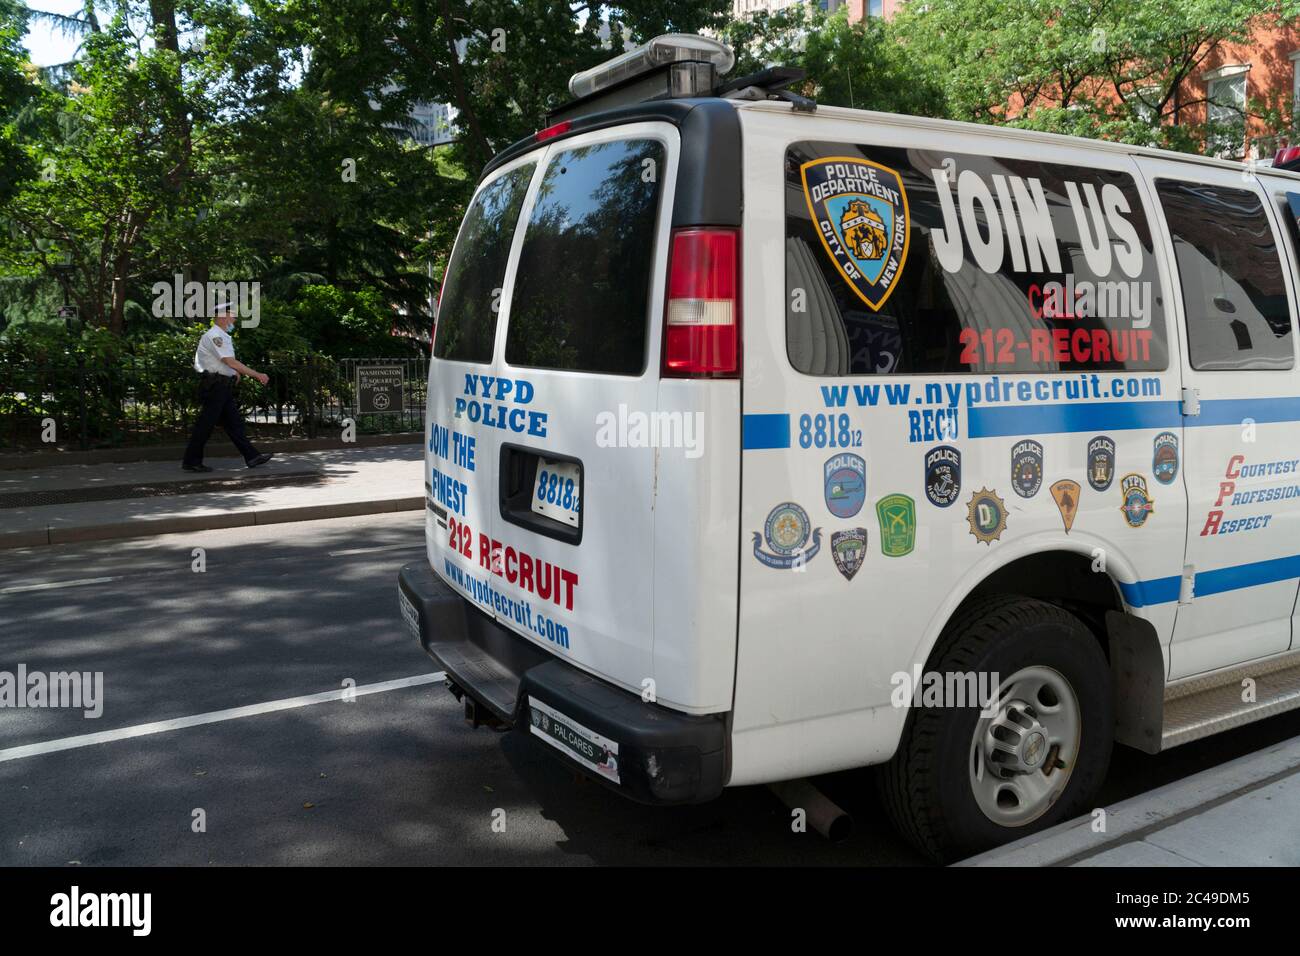 June 19, 2020, New York, New York, USA: NYPD recruit vehicle. Join us,  police department city of New York. In June 1865, Union soldiers arrived in  Texas to announce that all slaves